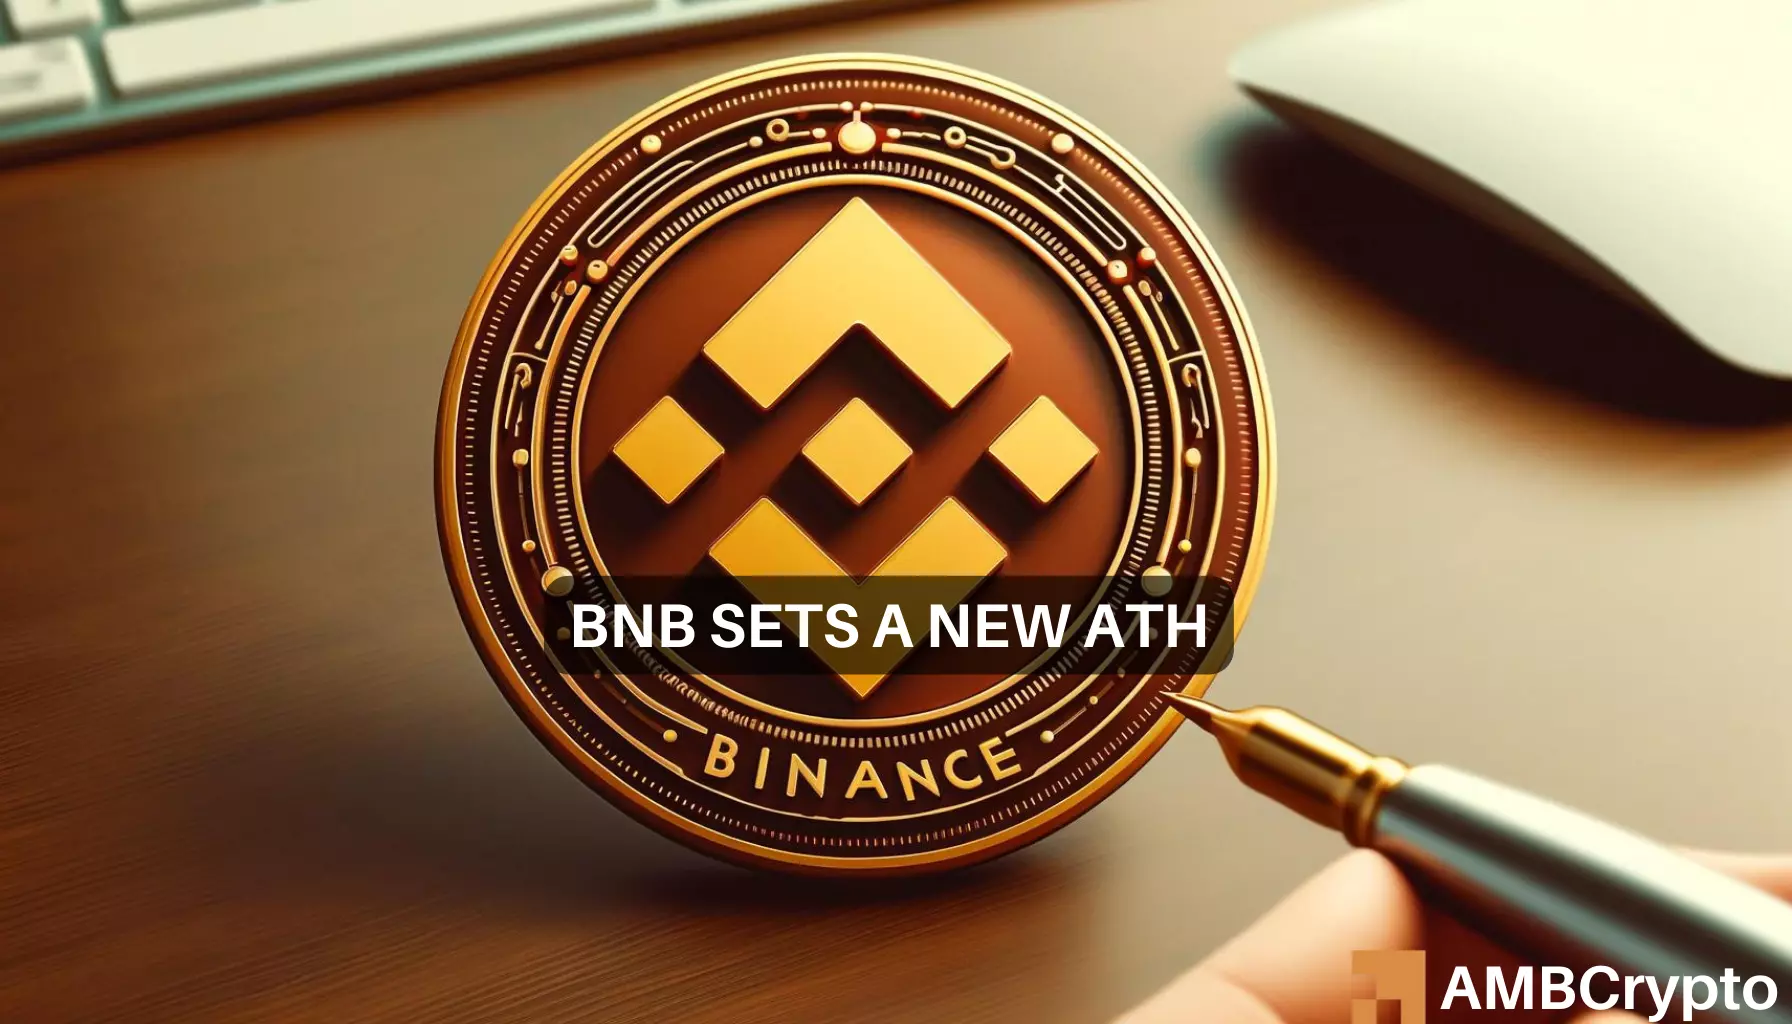 From FUD to ATH: Checking BNB’s remarkable recovery to $700